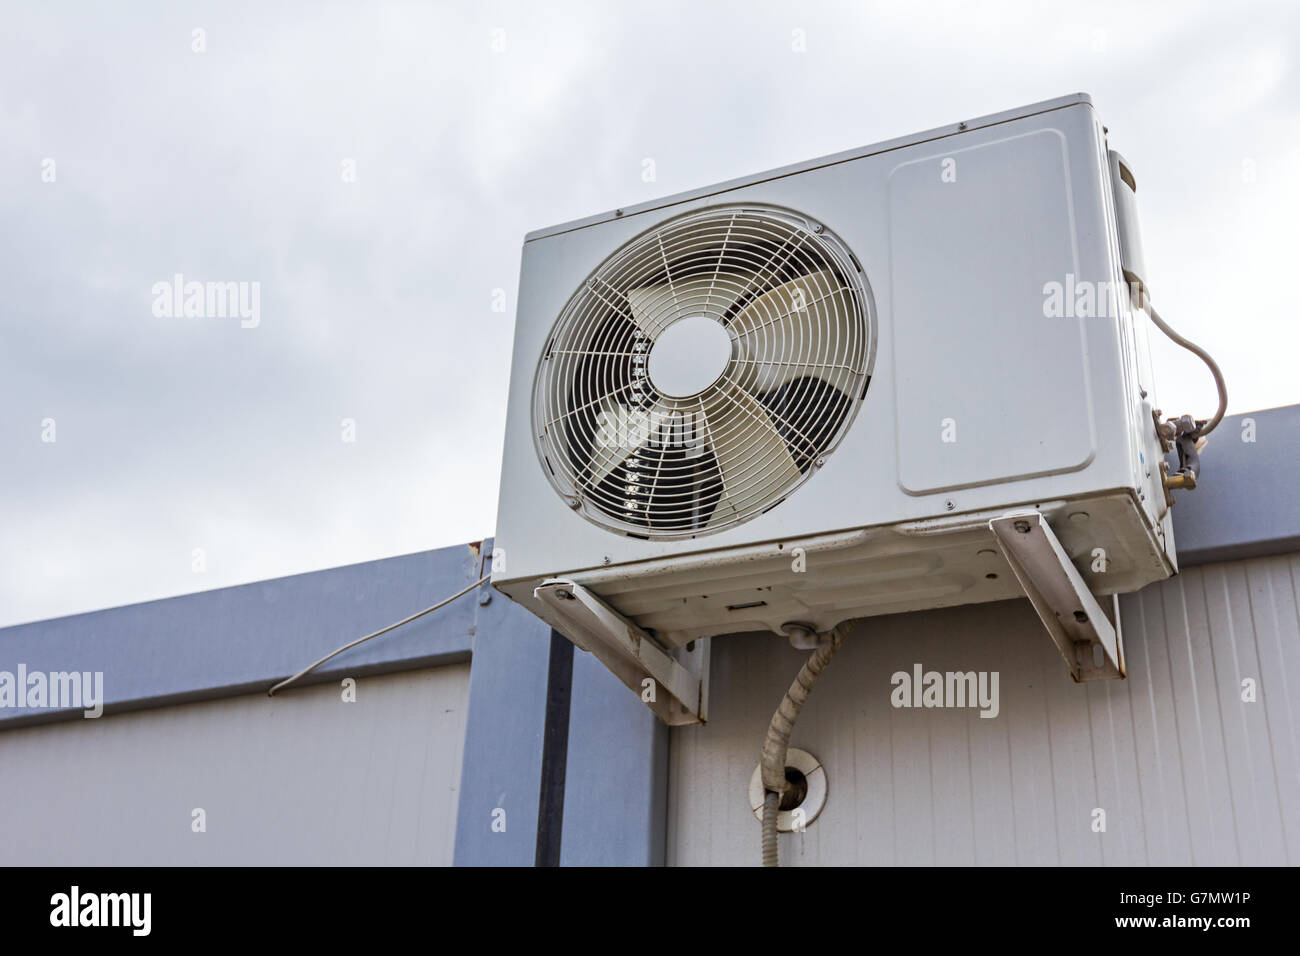 Outdoor unit, compressor, of air conditioner is placed on white container office. Stock Photo